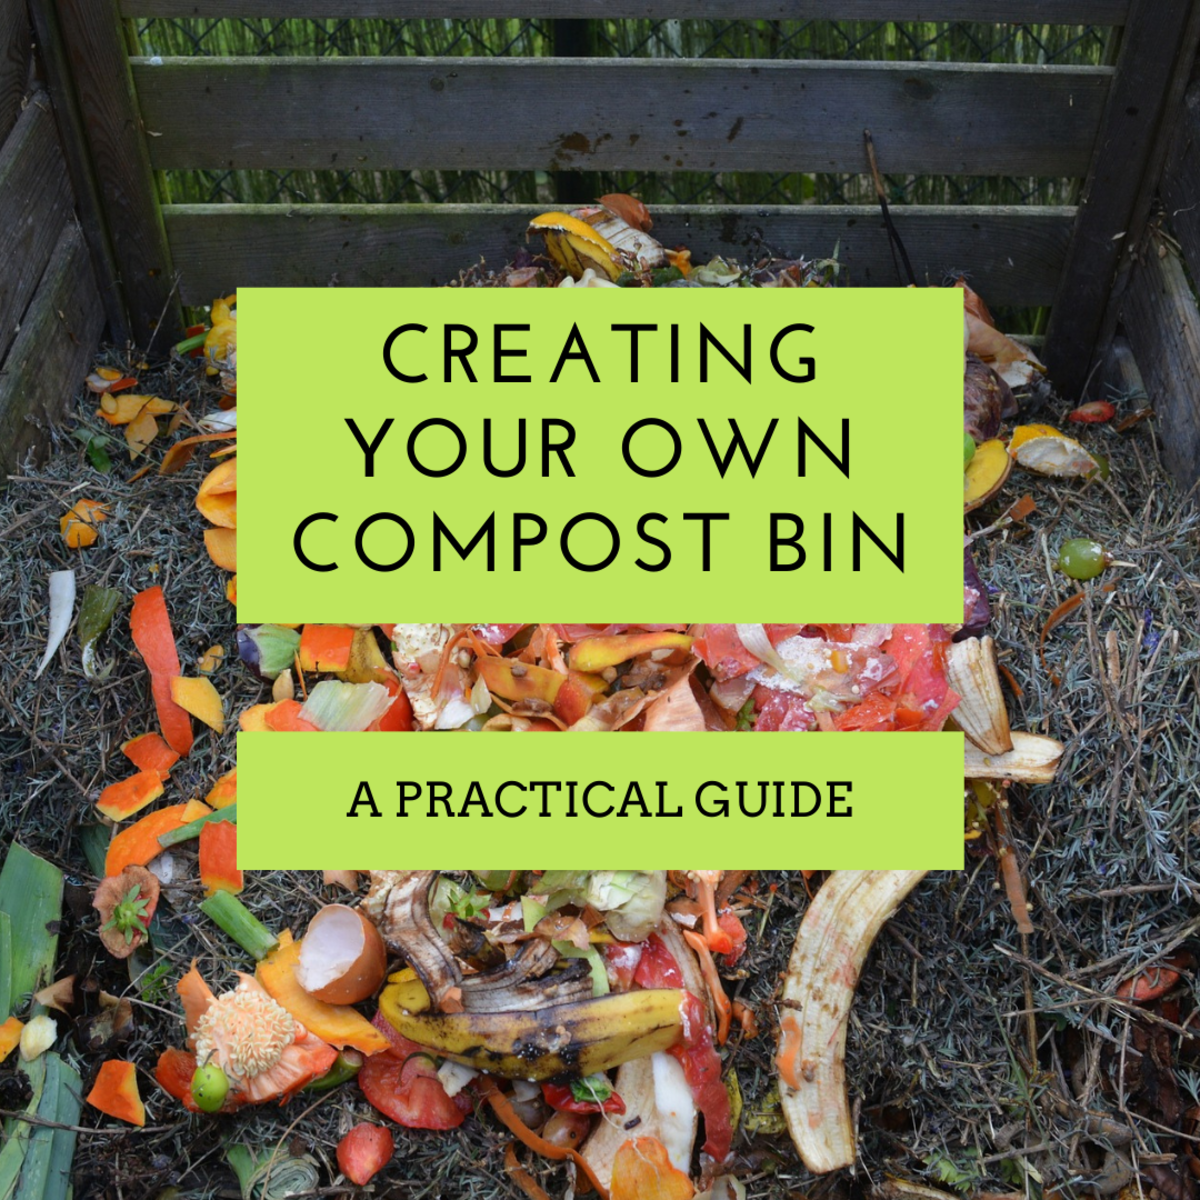 How to Build Your Own Compost Bin and Make Compost at Home: A Practical Guide